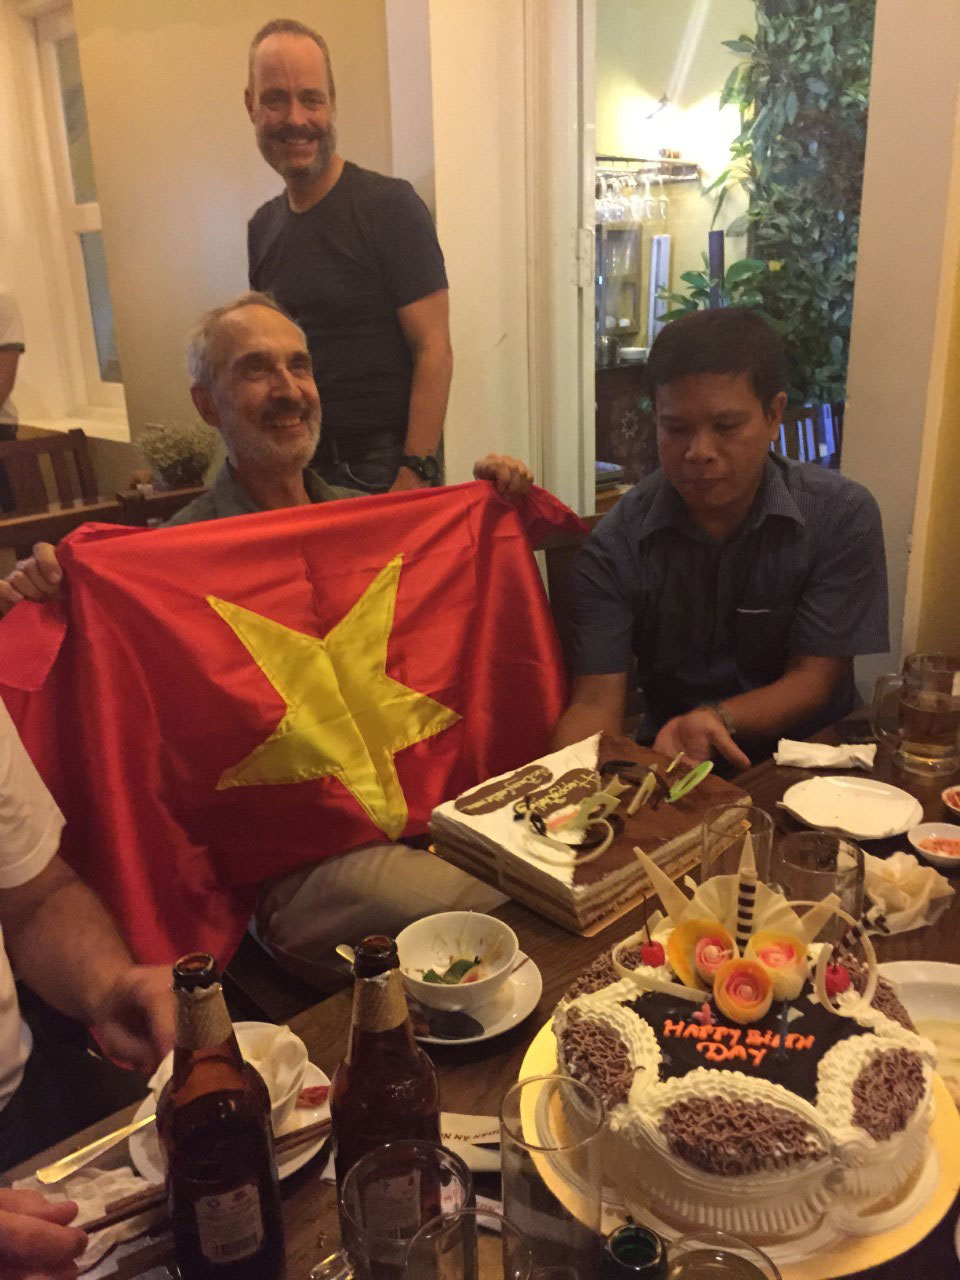 Renowned asbestos victims campaigner Dr Barry Castleman (holding flag), at a surprise 69th birthday party organised by corporate spy Rob Moore in Hanoi. Moore is pictured standing in the background. 